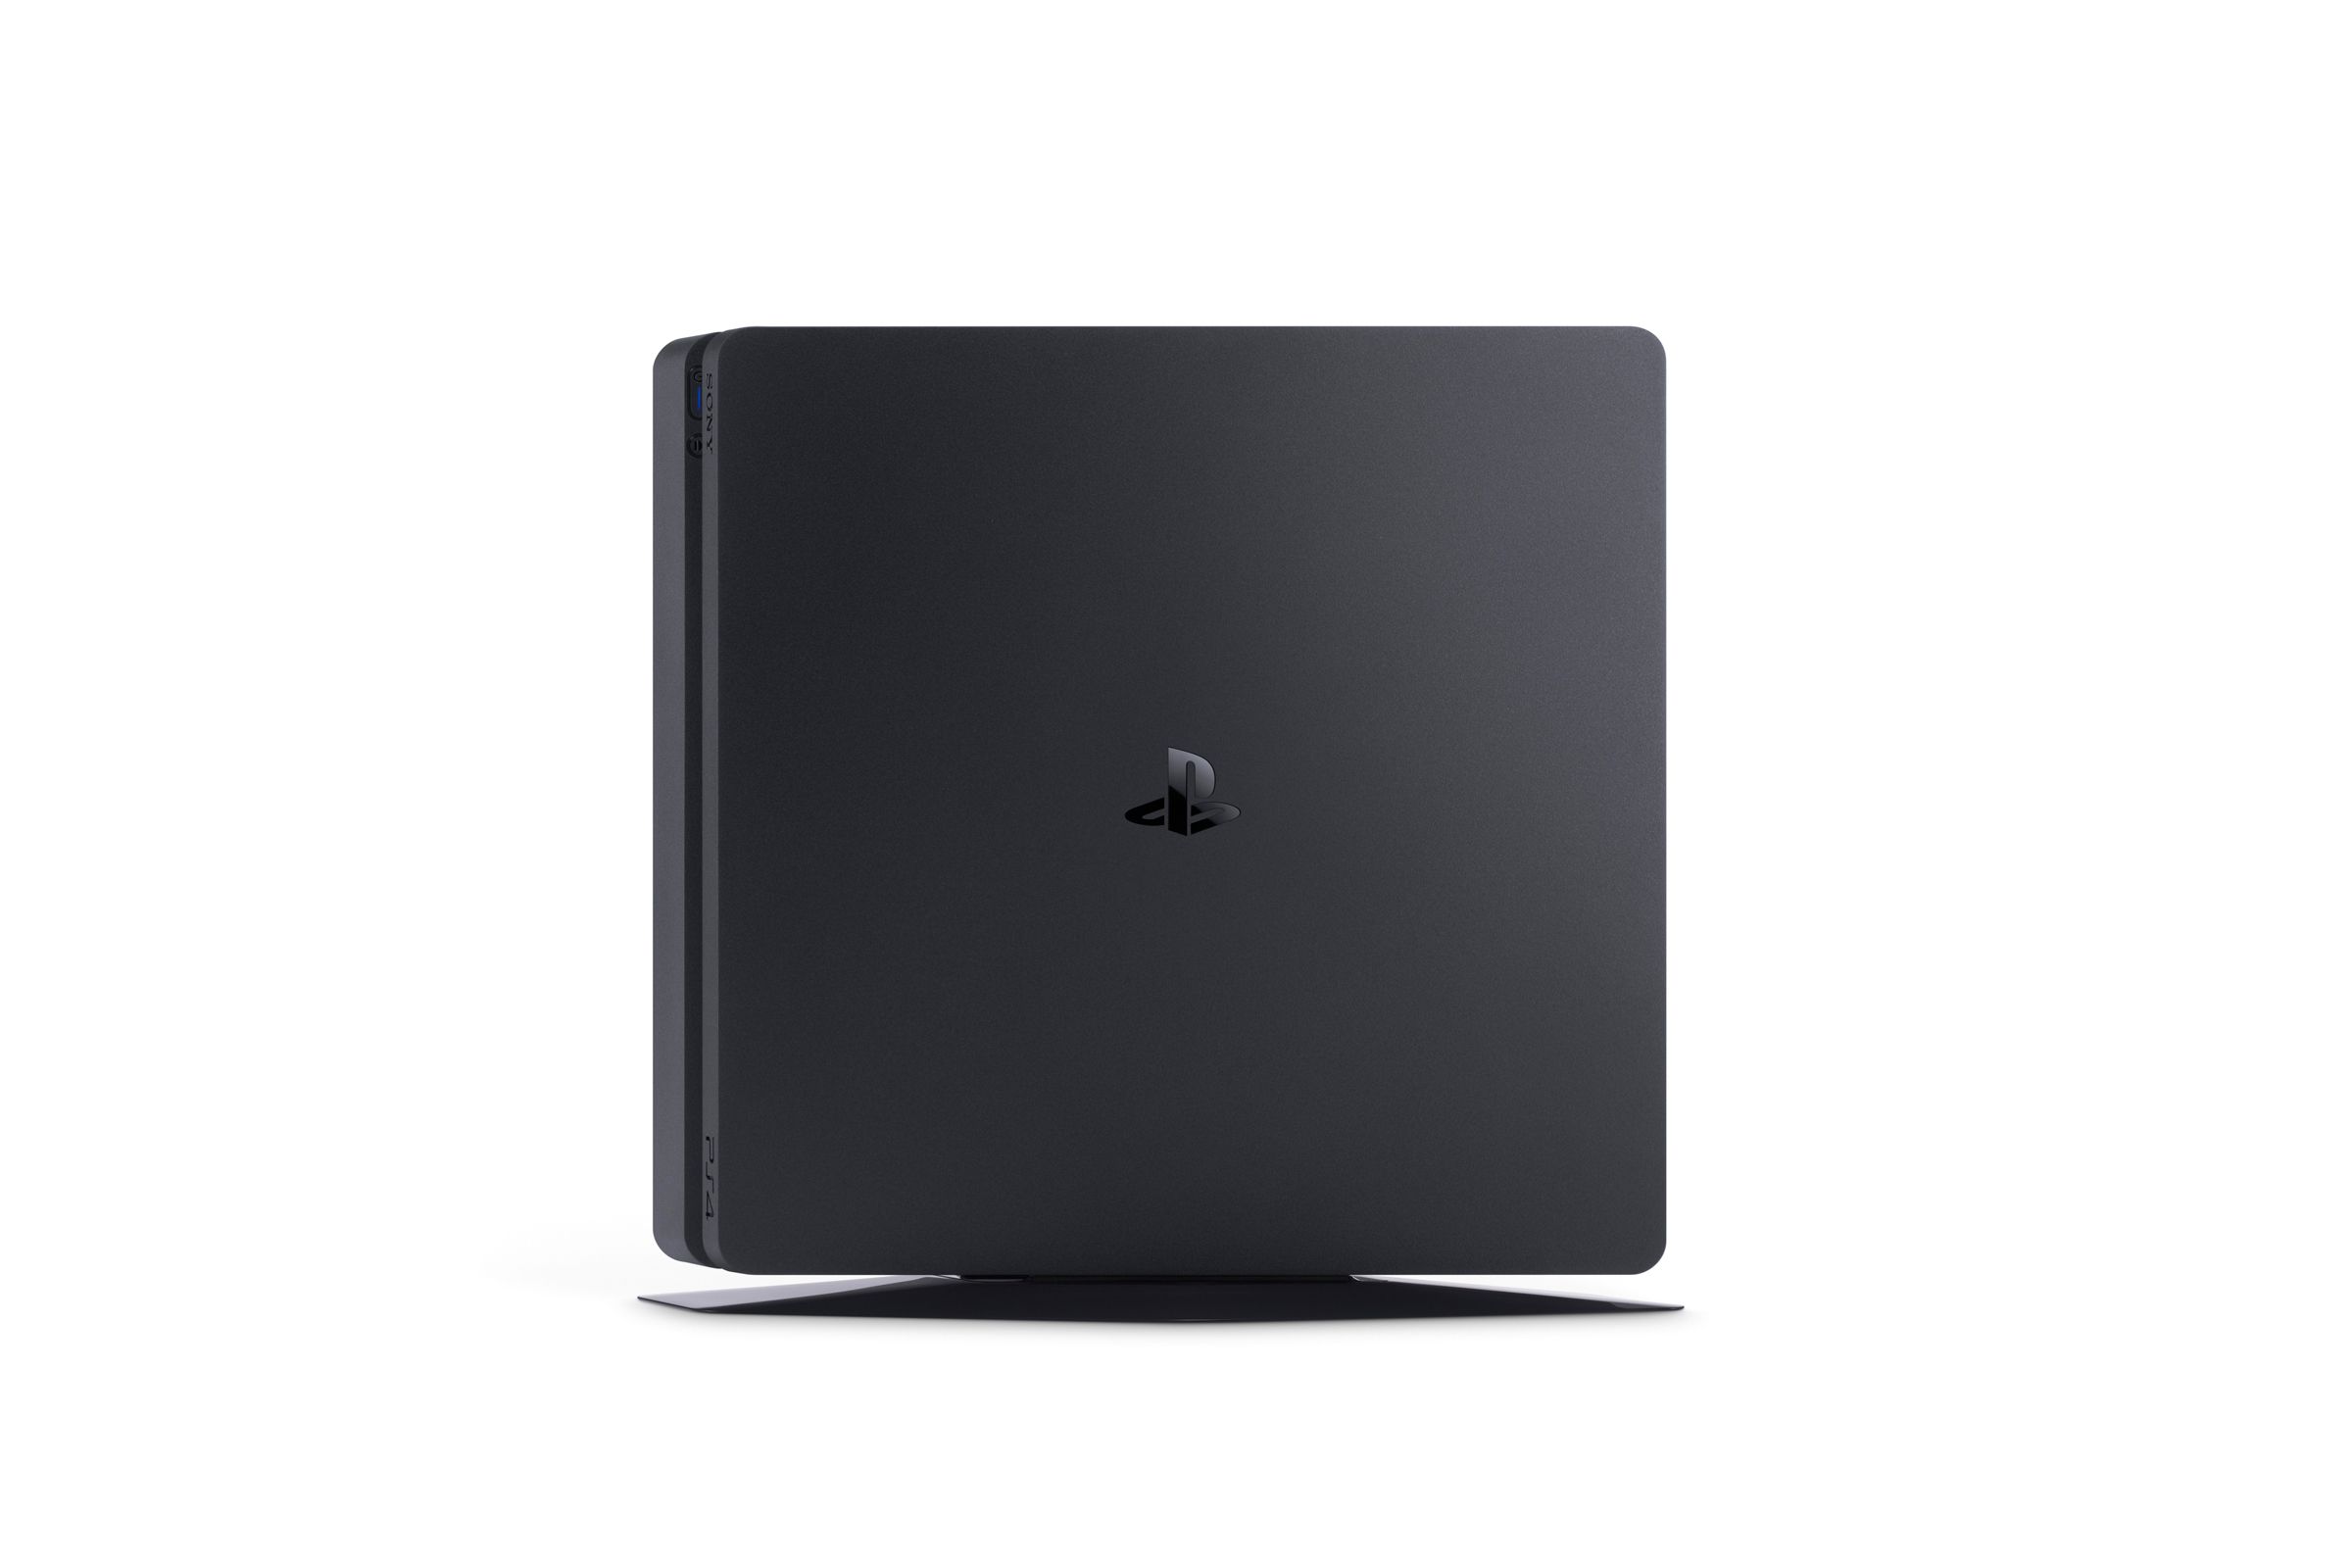 ps4 slim release date price